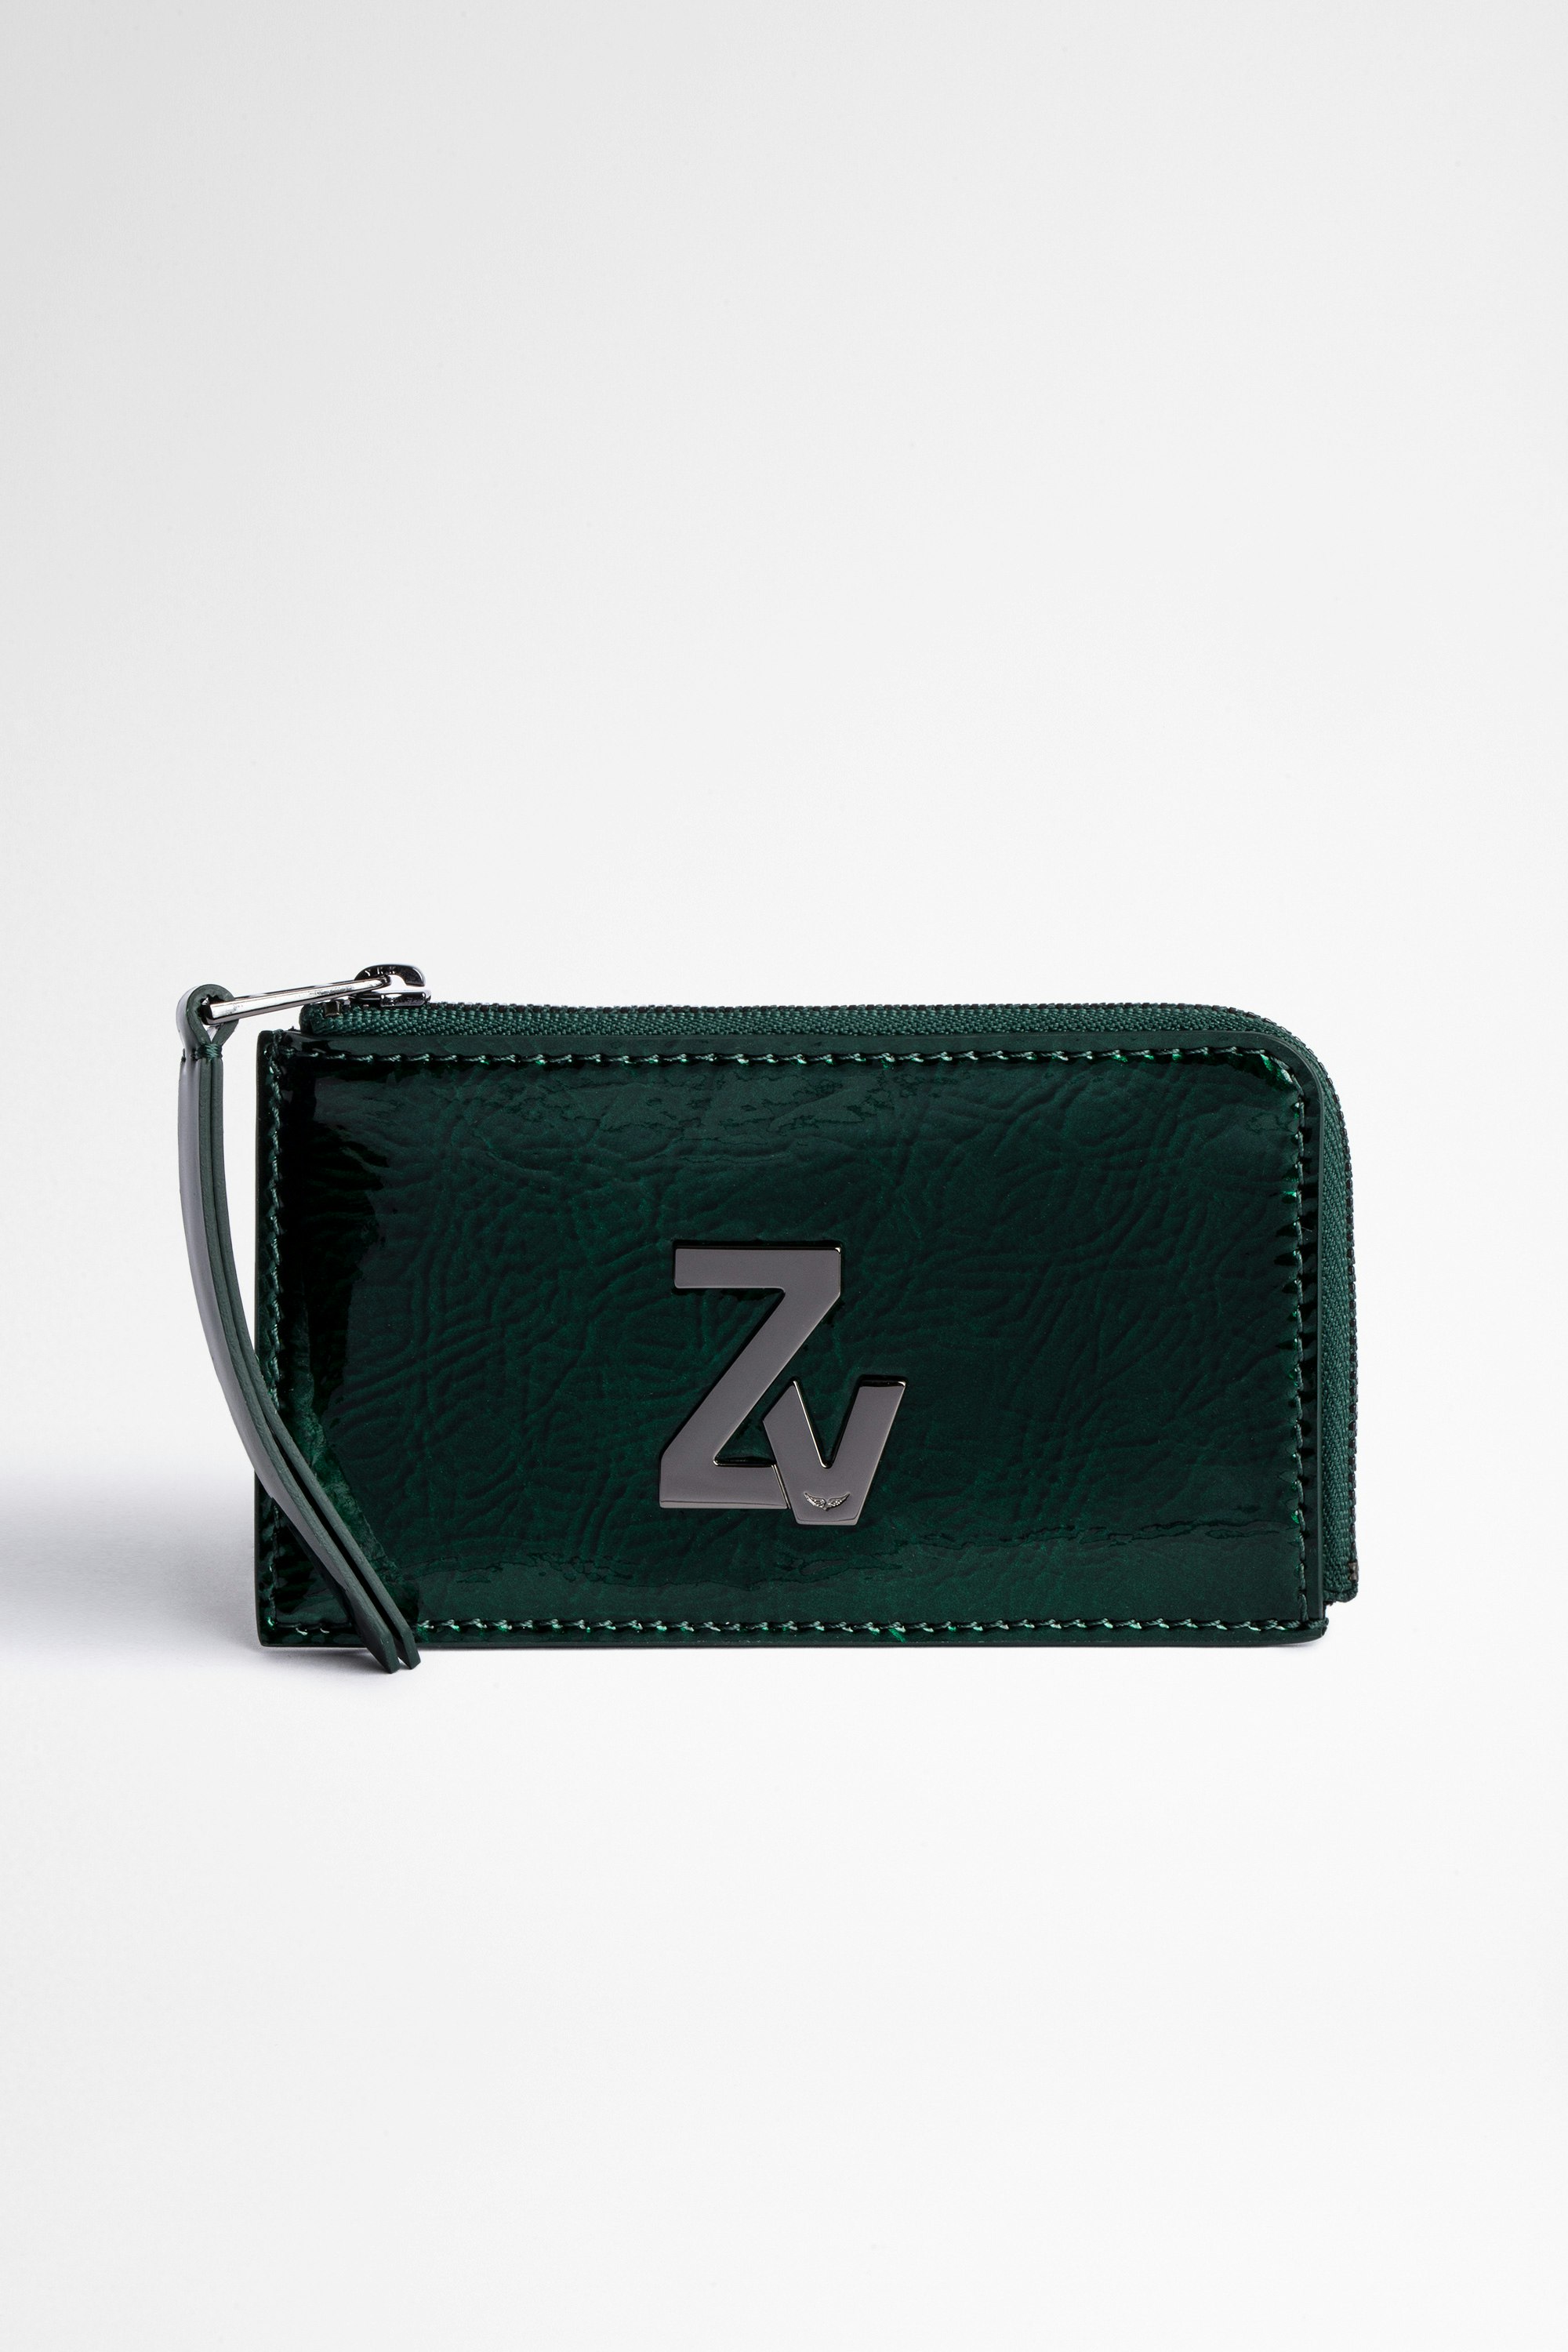 Zv Initiale Le Medium Card Holder Women's green leather card holder